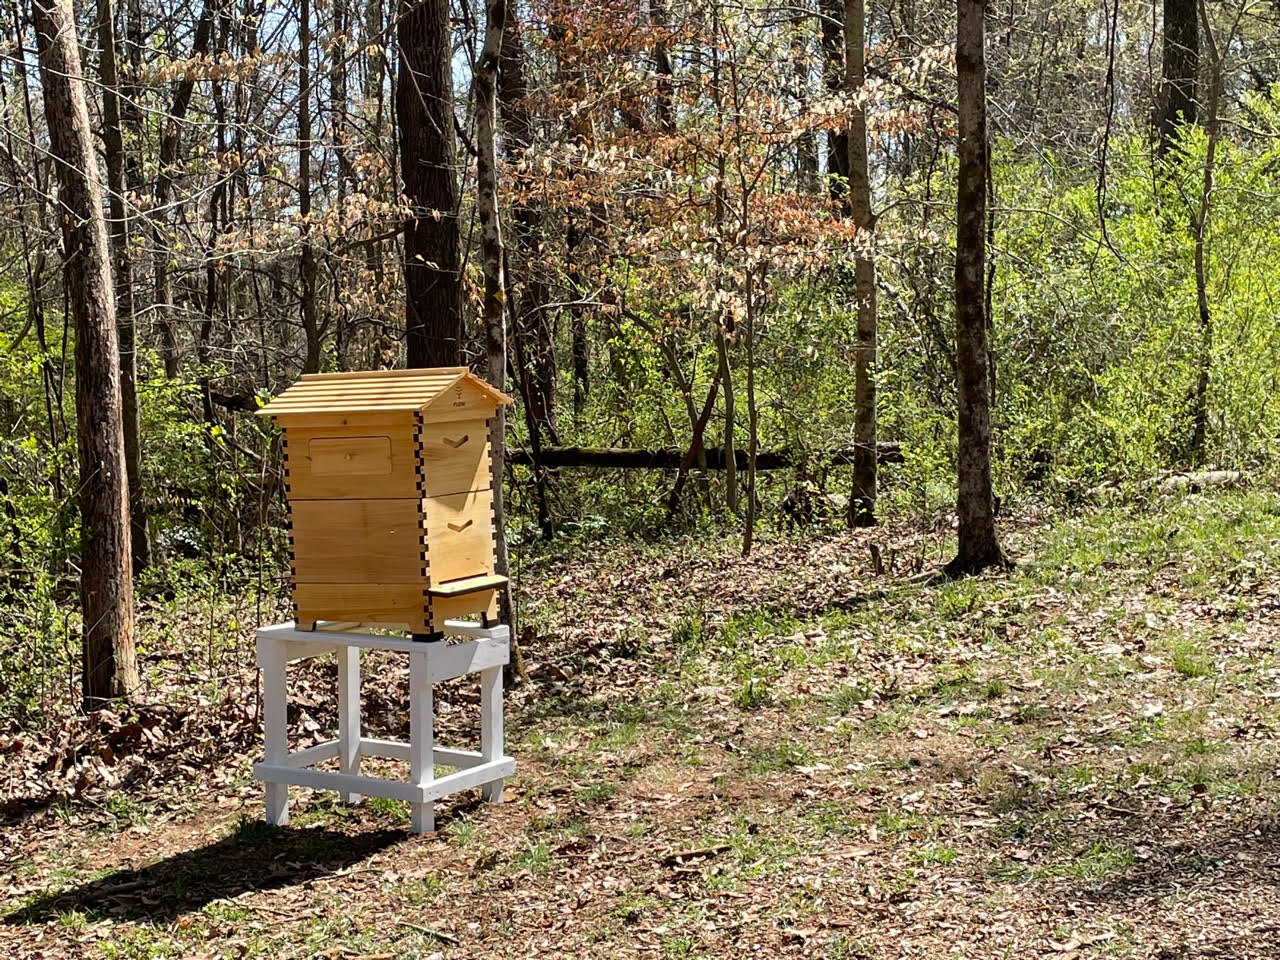 A wooden-framed beekeeping box sits outside the woods at Loghaven Artist Residency.